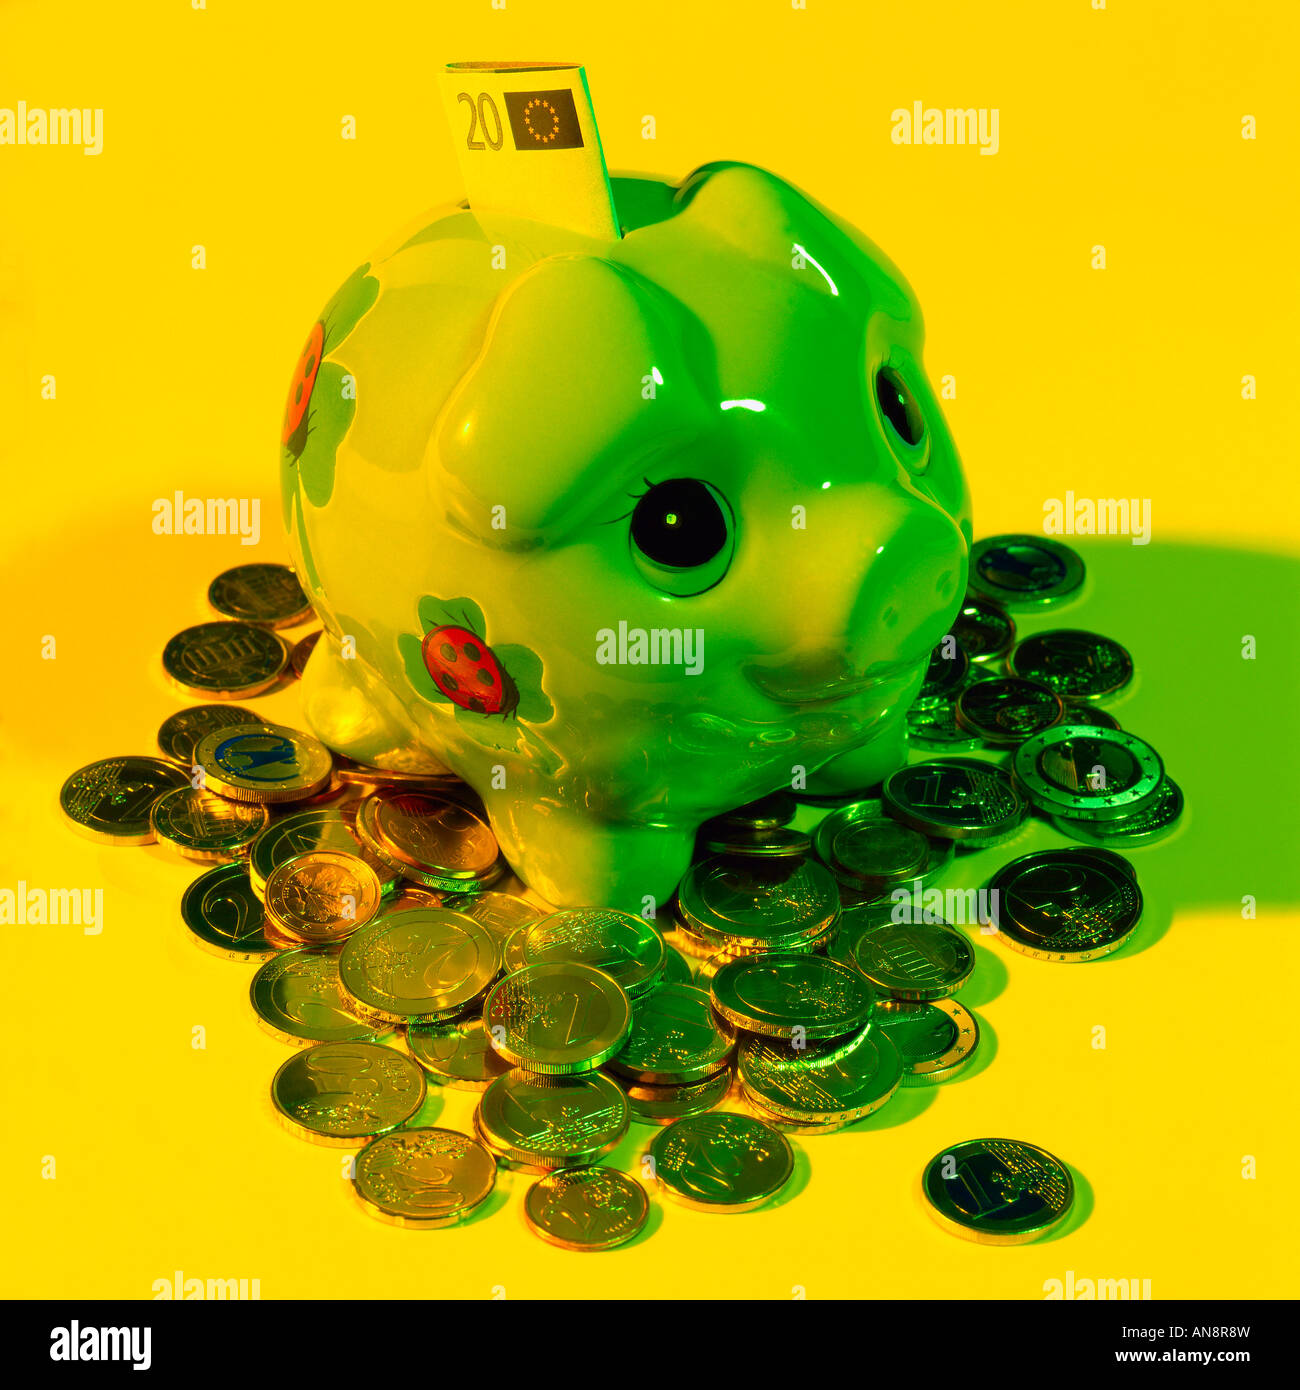 Piggy bank colored by yellow light Stock Photo